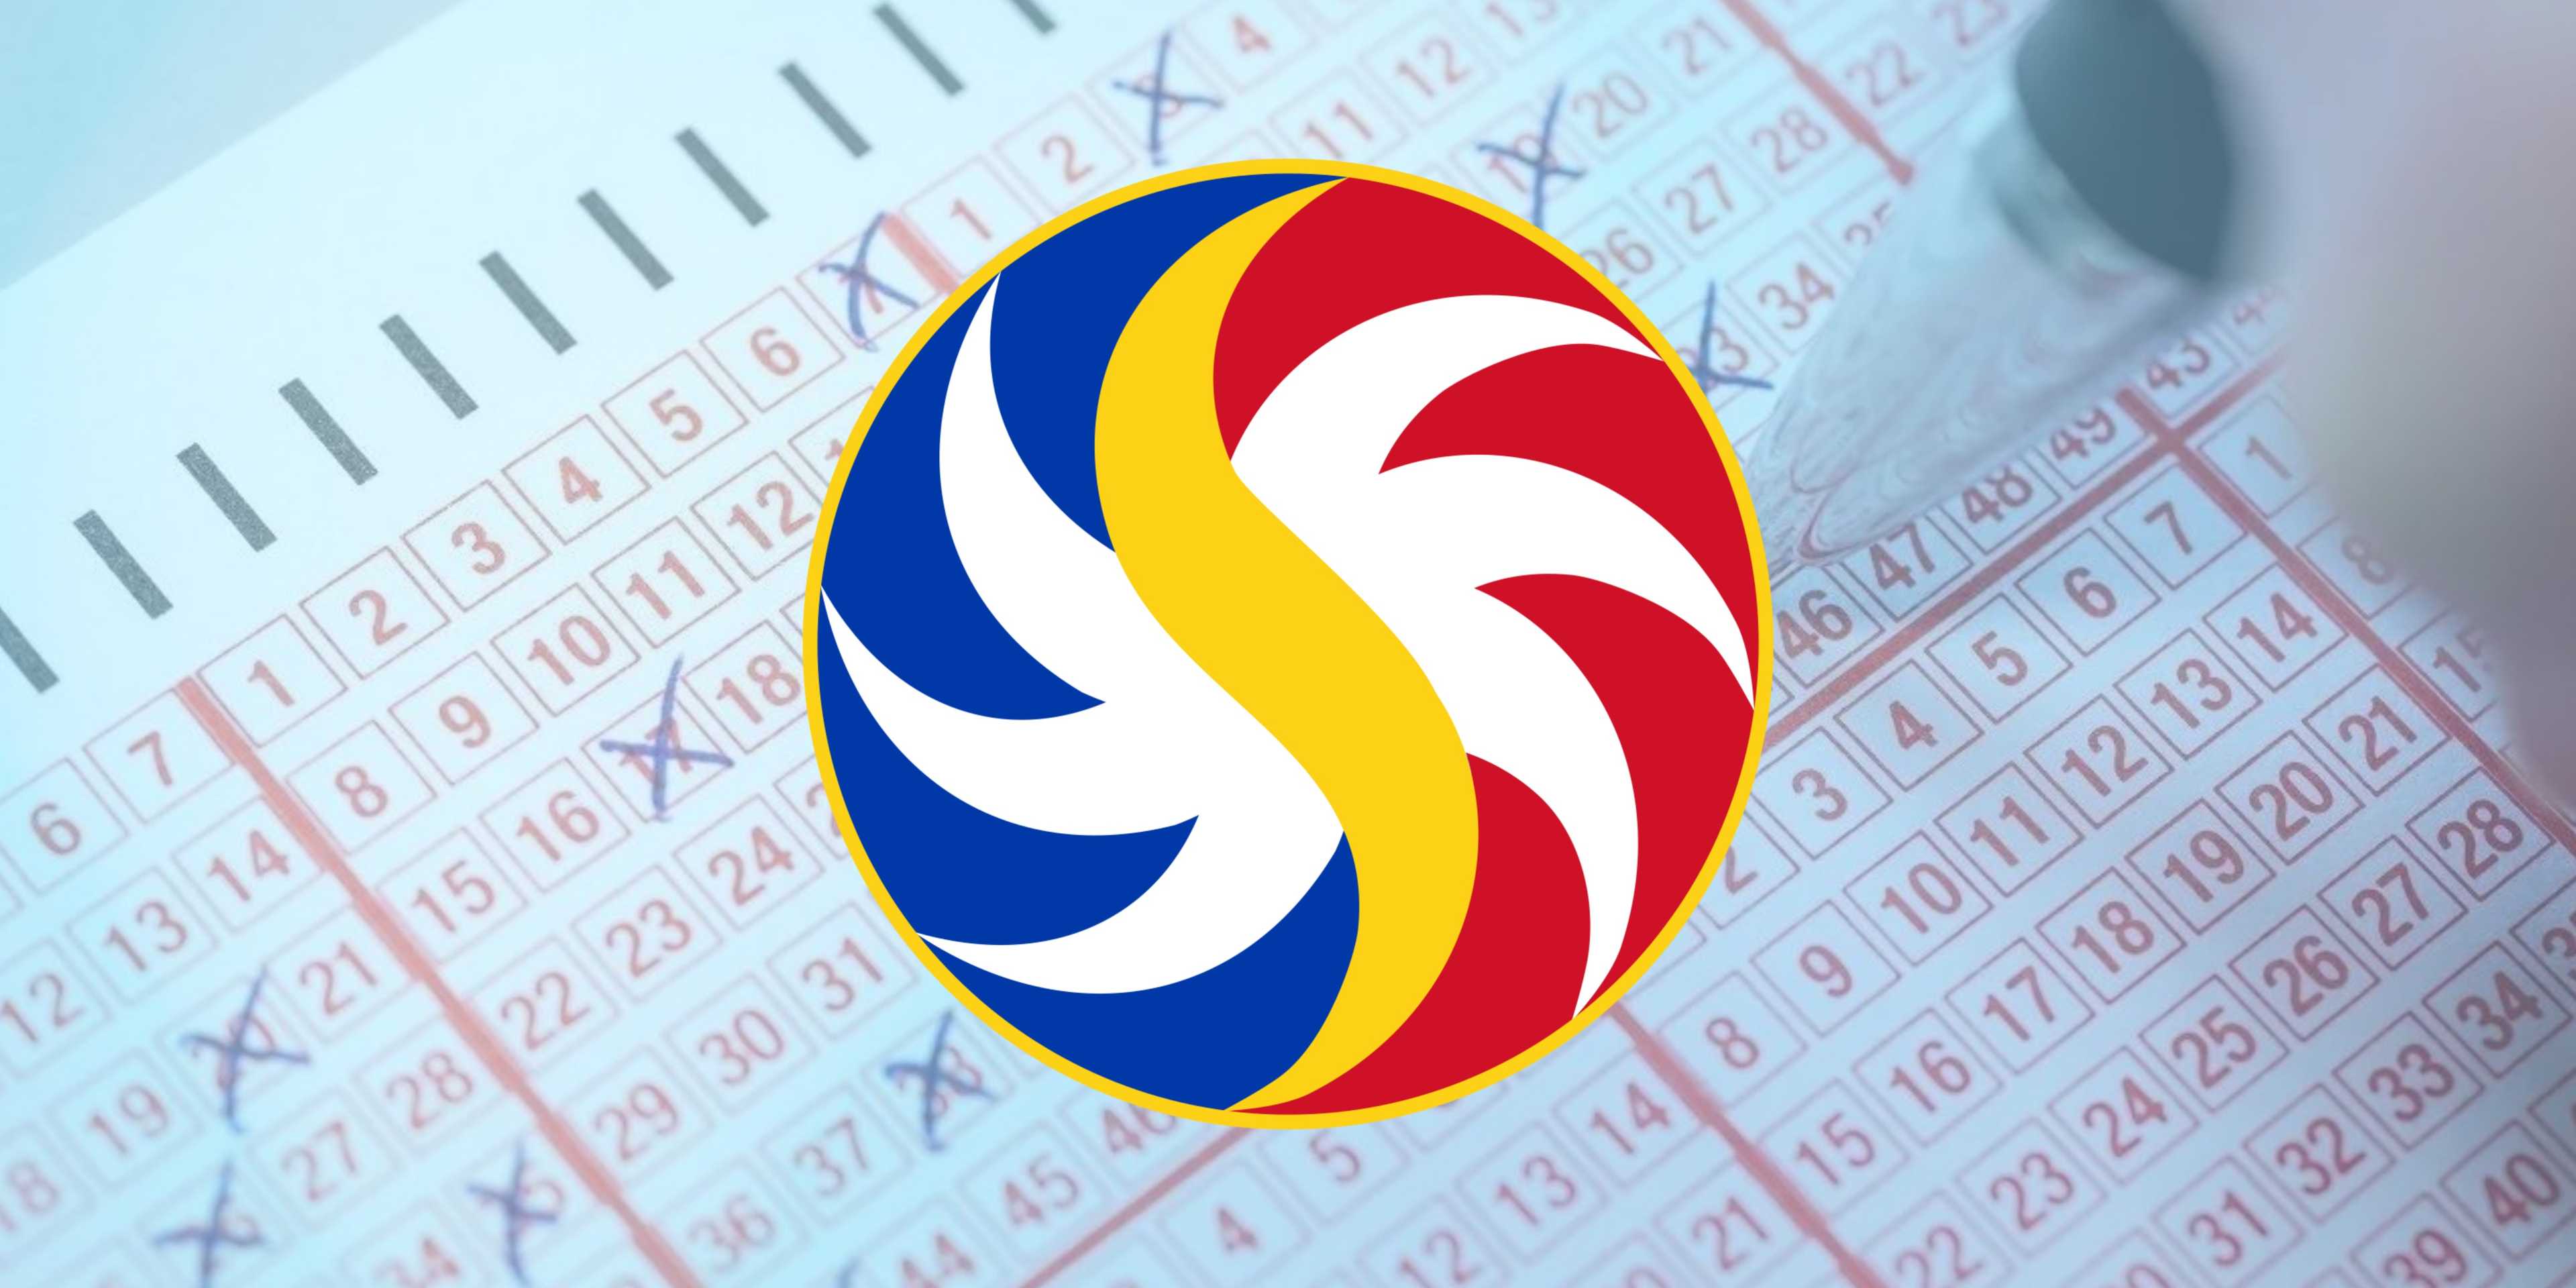 PCSO Lotto Draw Results on Saturday, February 24